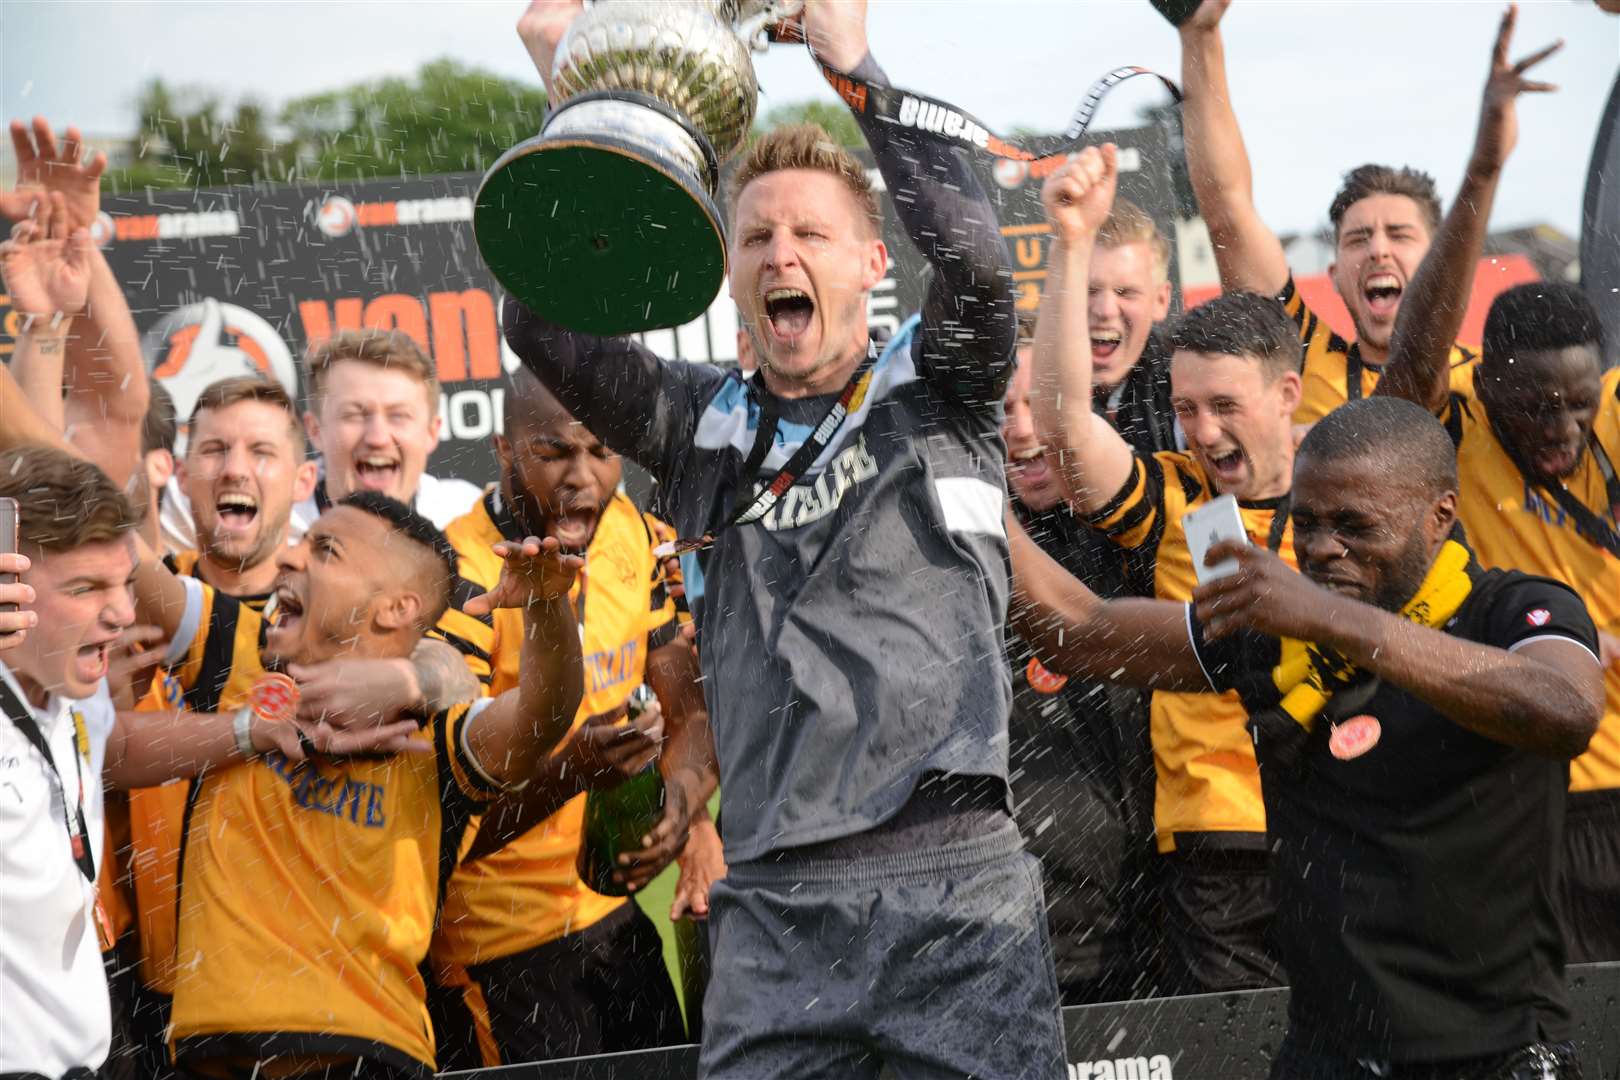 Lee Worgan captained Maidstone to the National League, saving the decisive penalty in the play-off final at Ebbsfleet Picture: Gary Browne